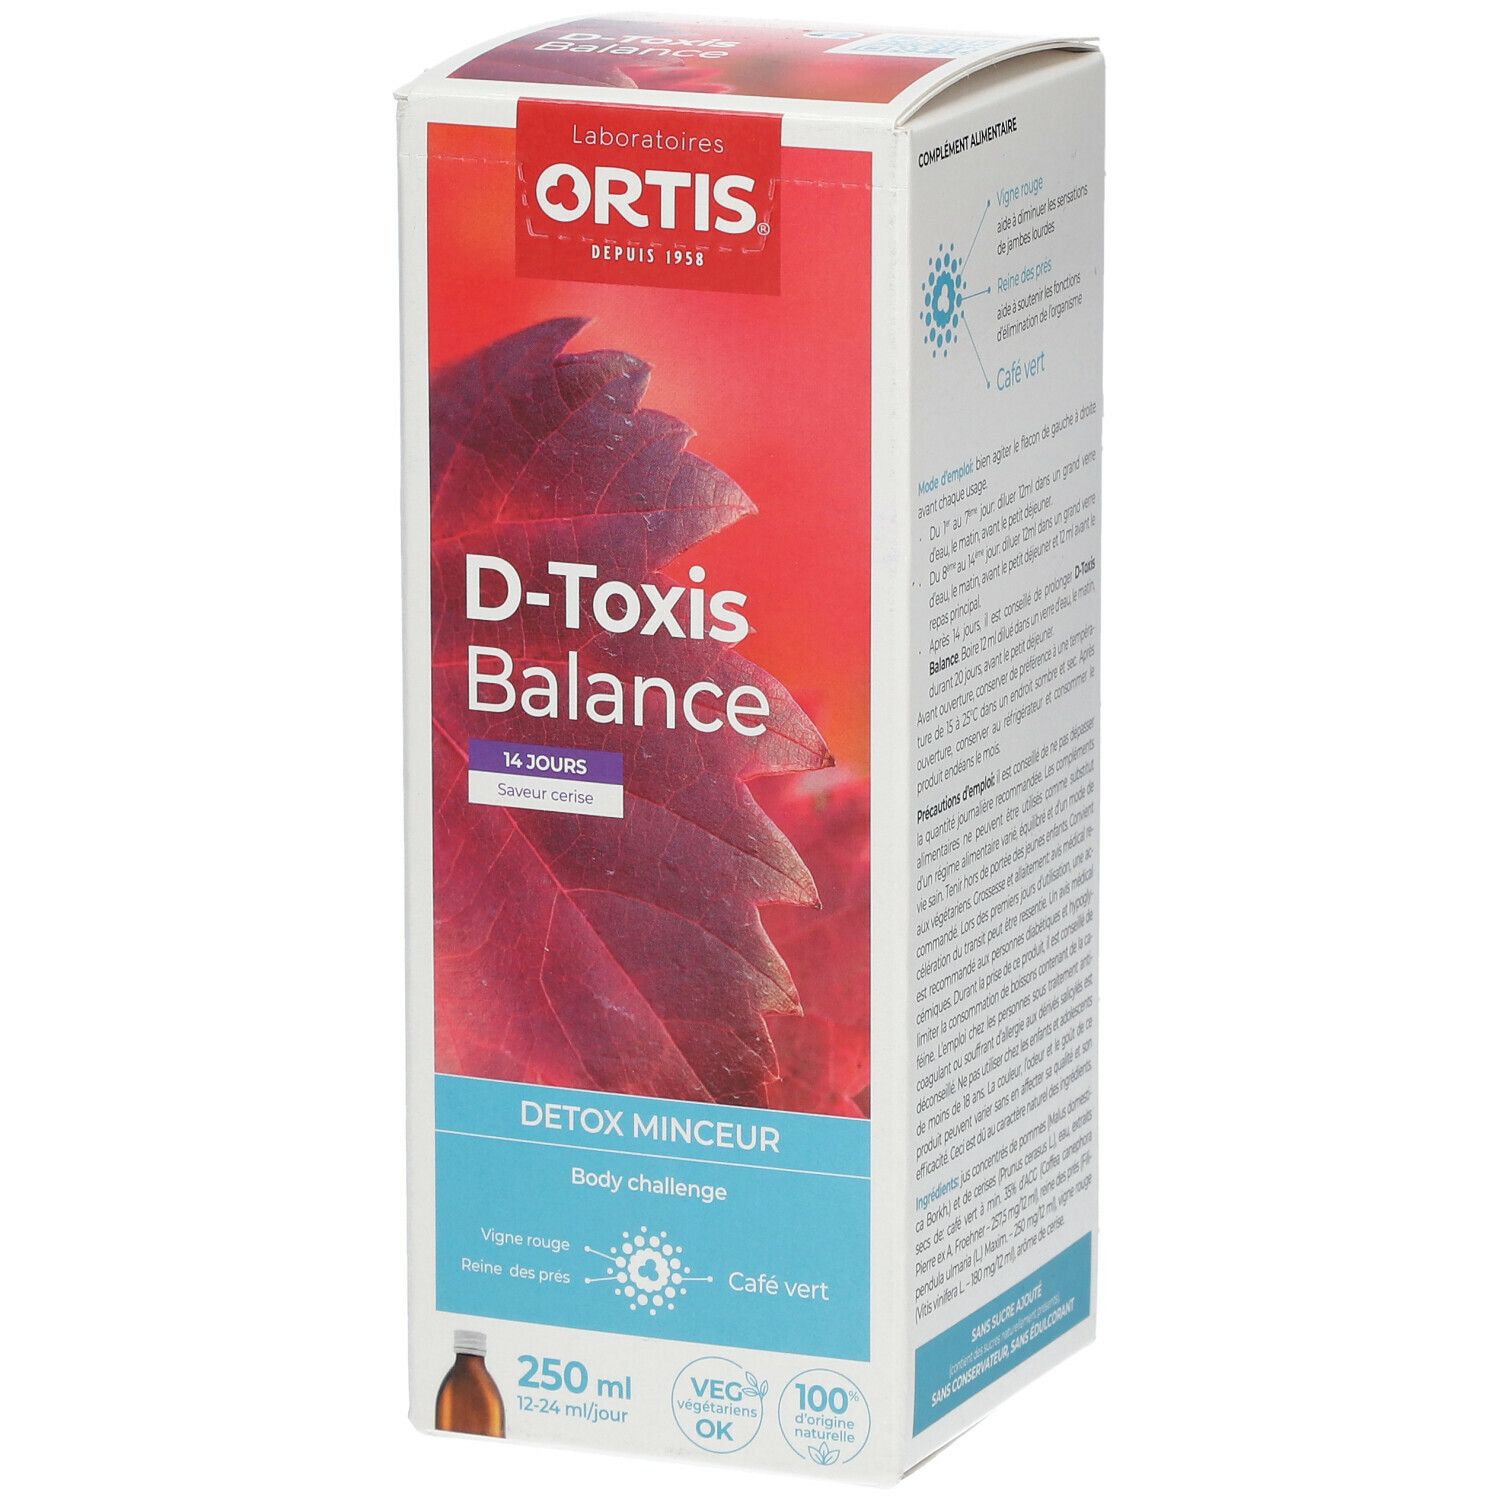 Ortis D-Toxis Balance